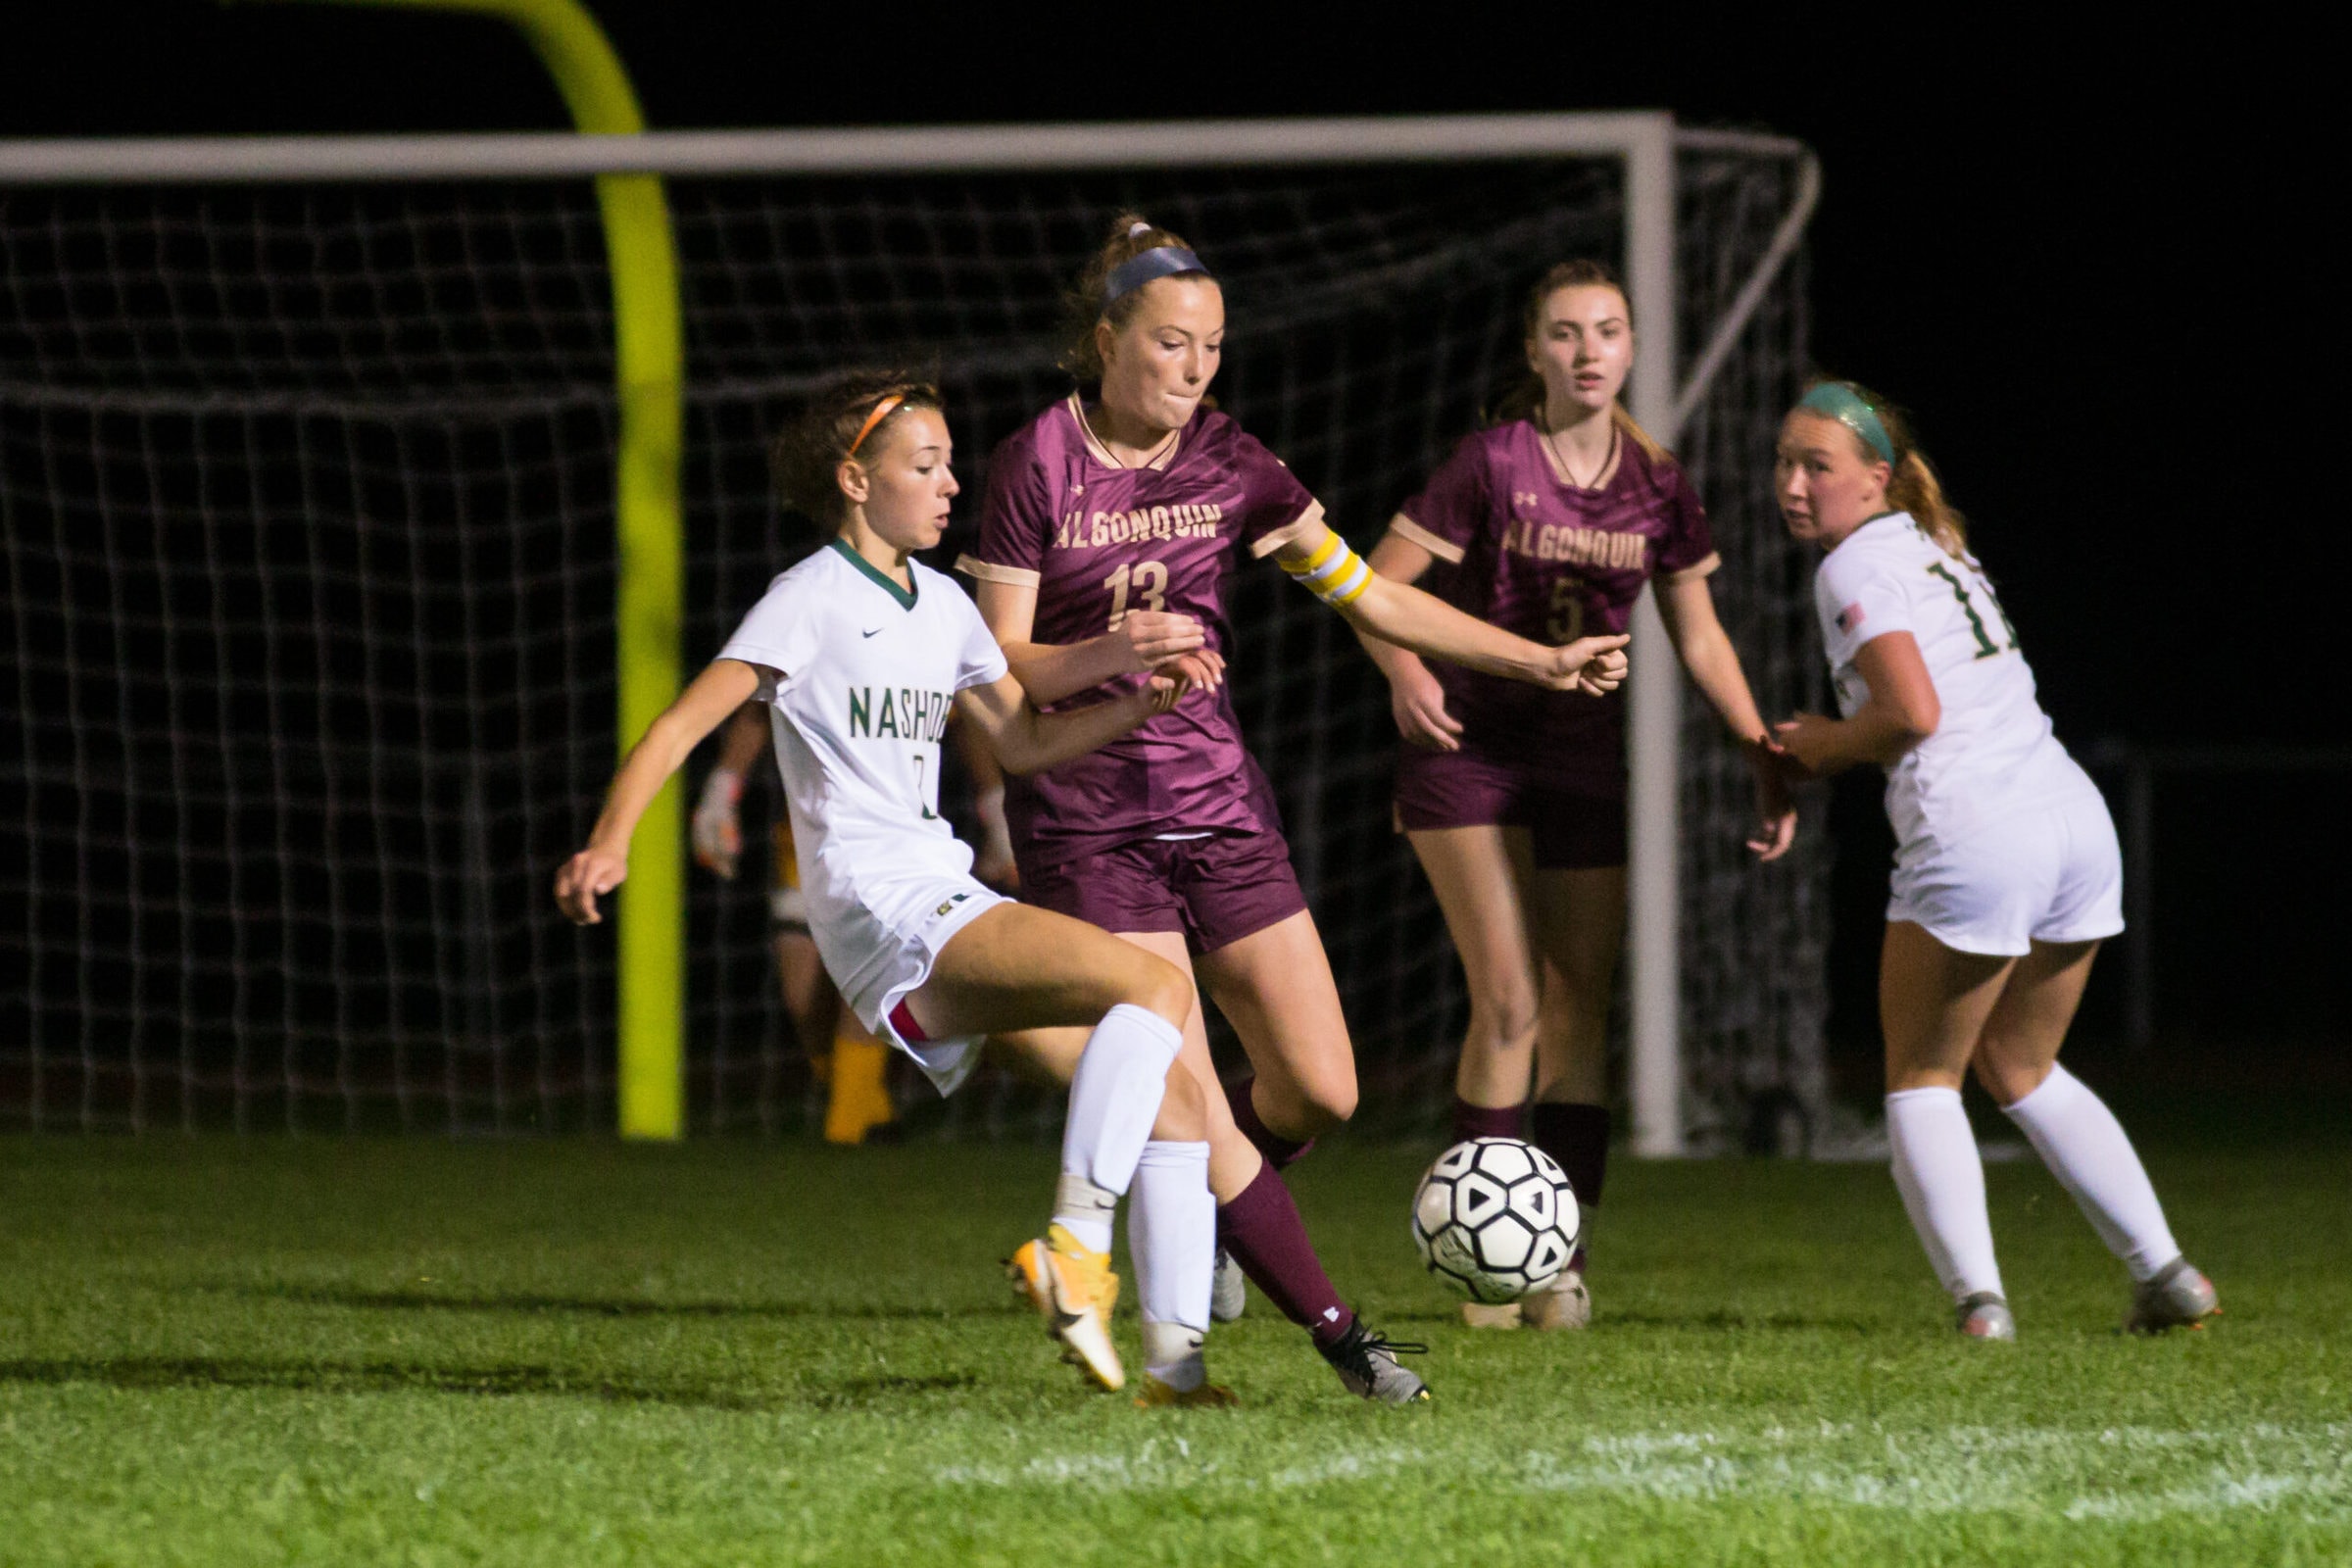 Algonquin girls soccer hopes shutout victory will mark turning point in season